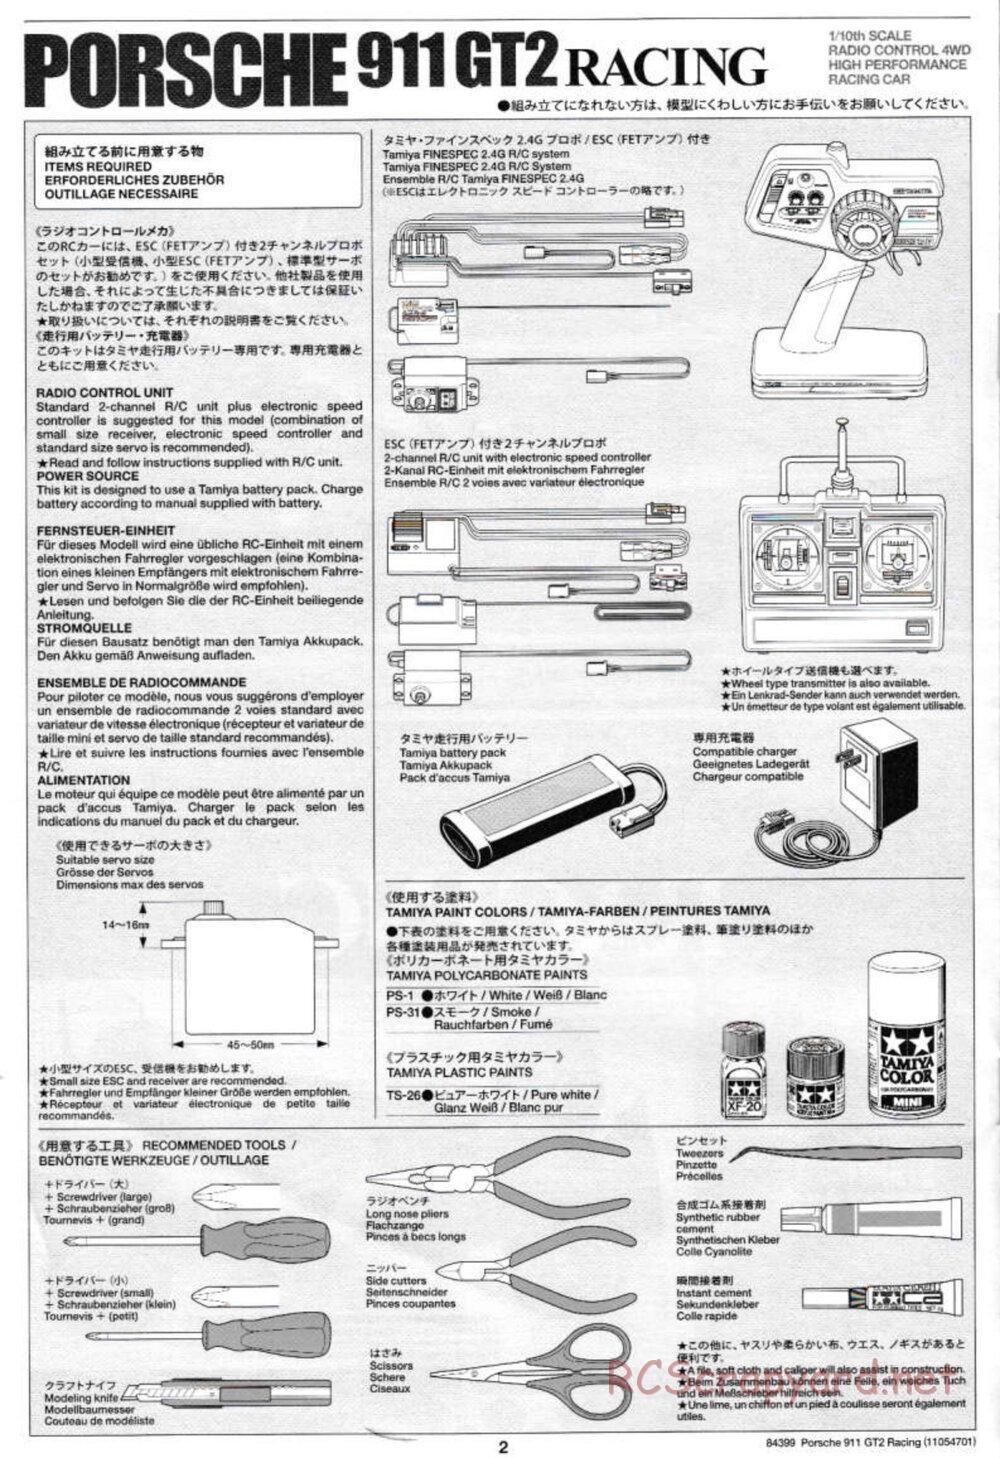 Tamiya - Porsche 911 GT2 Racing - TA-02SW Chassis - Manual - Page 2